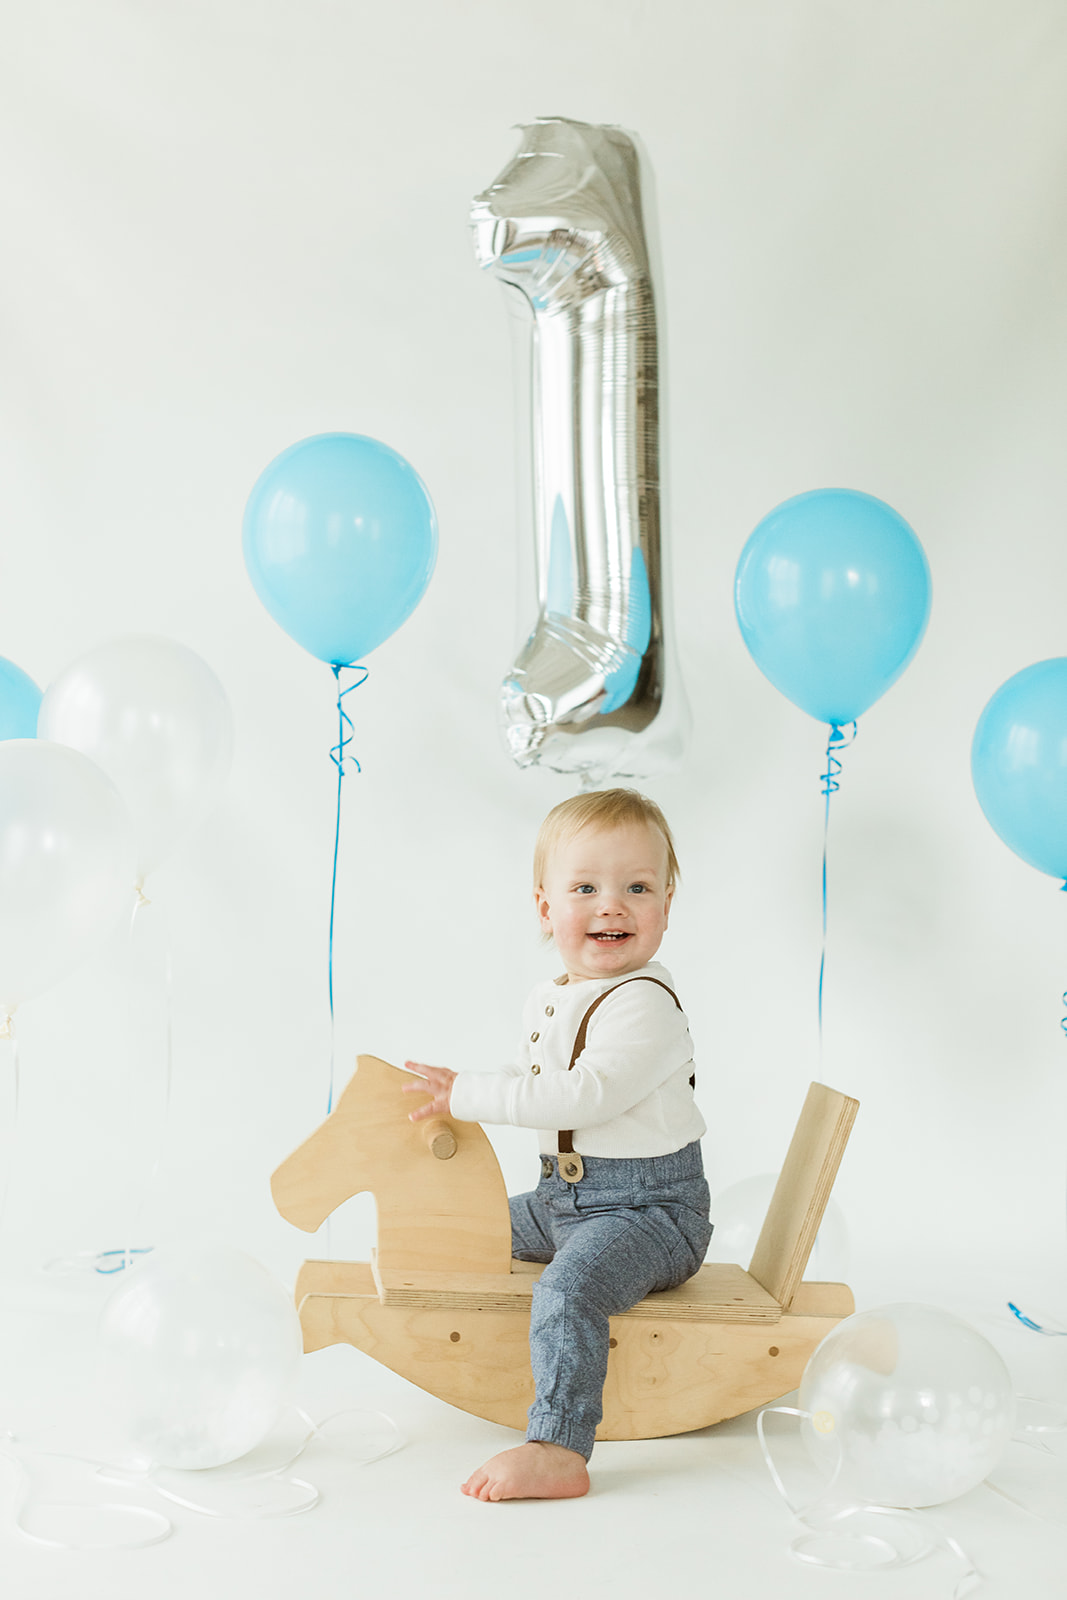 1 year old photo shoot in nashville tennessee. baby with birthday balloons